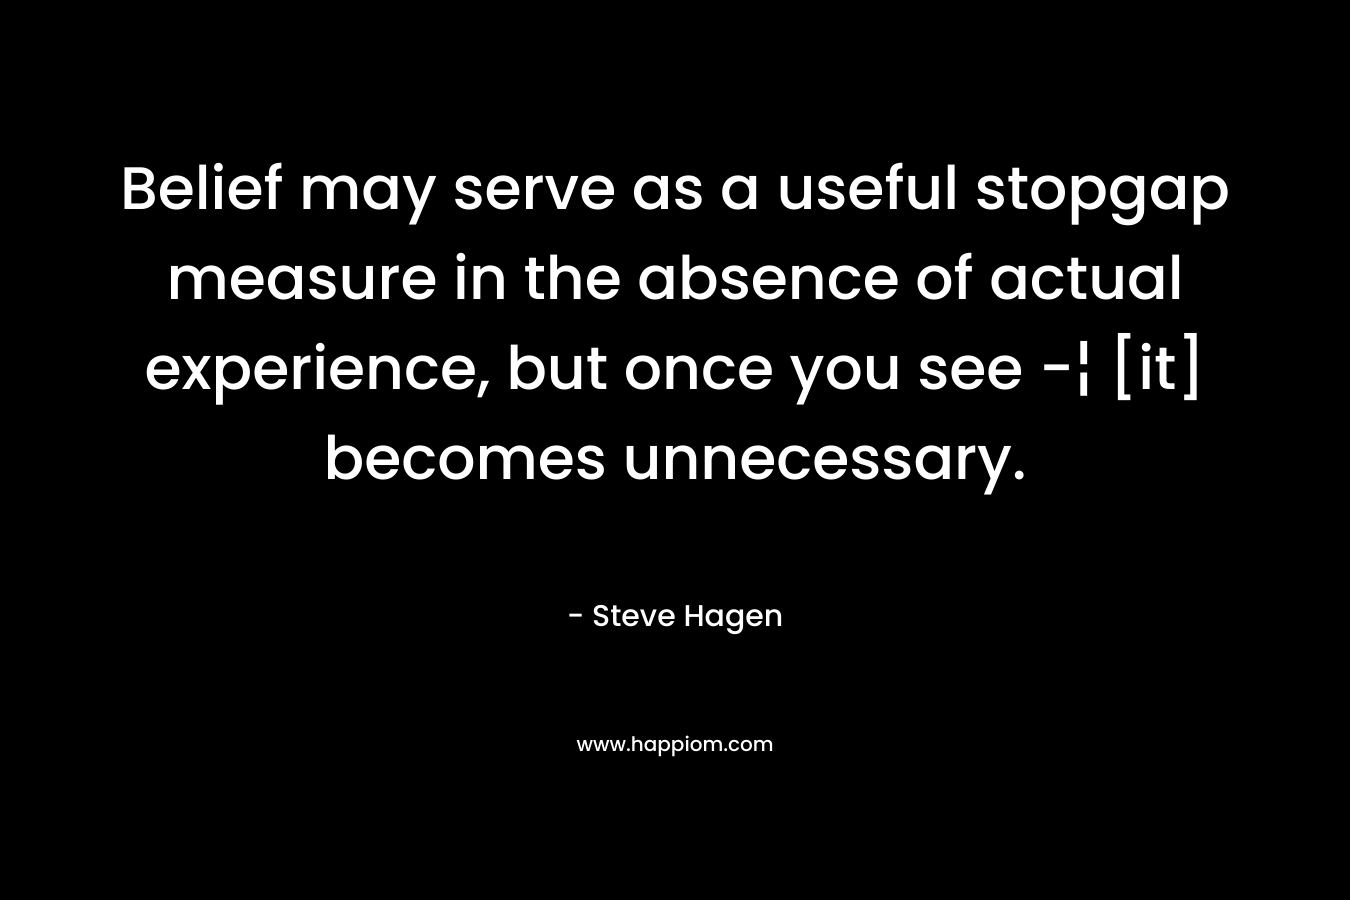 Belief may serve as a useful stopgap measure in the absence of actual experience, but once you see -¦ [it] becomes unnecessary.